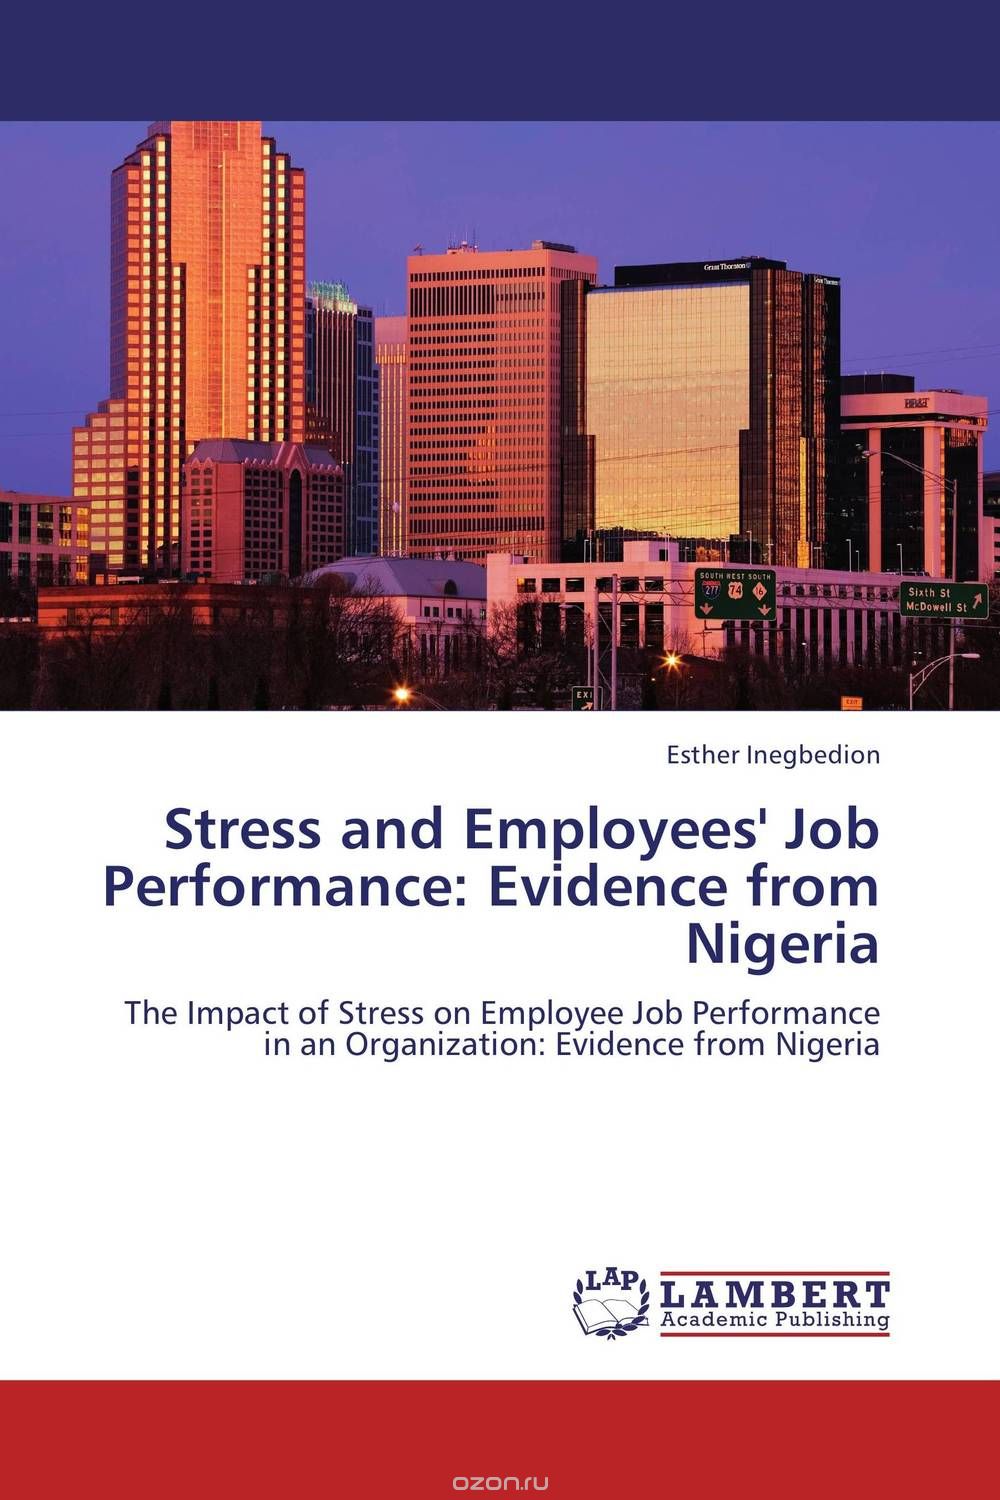 Stress and Employees' Job Performance: Evidence from Nigeria